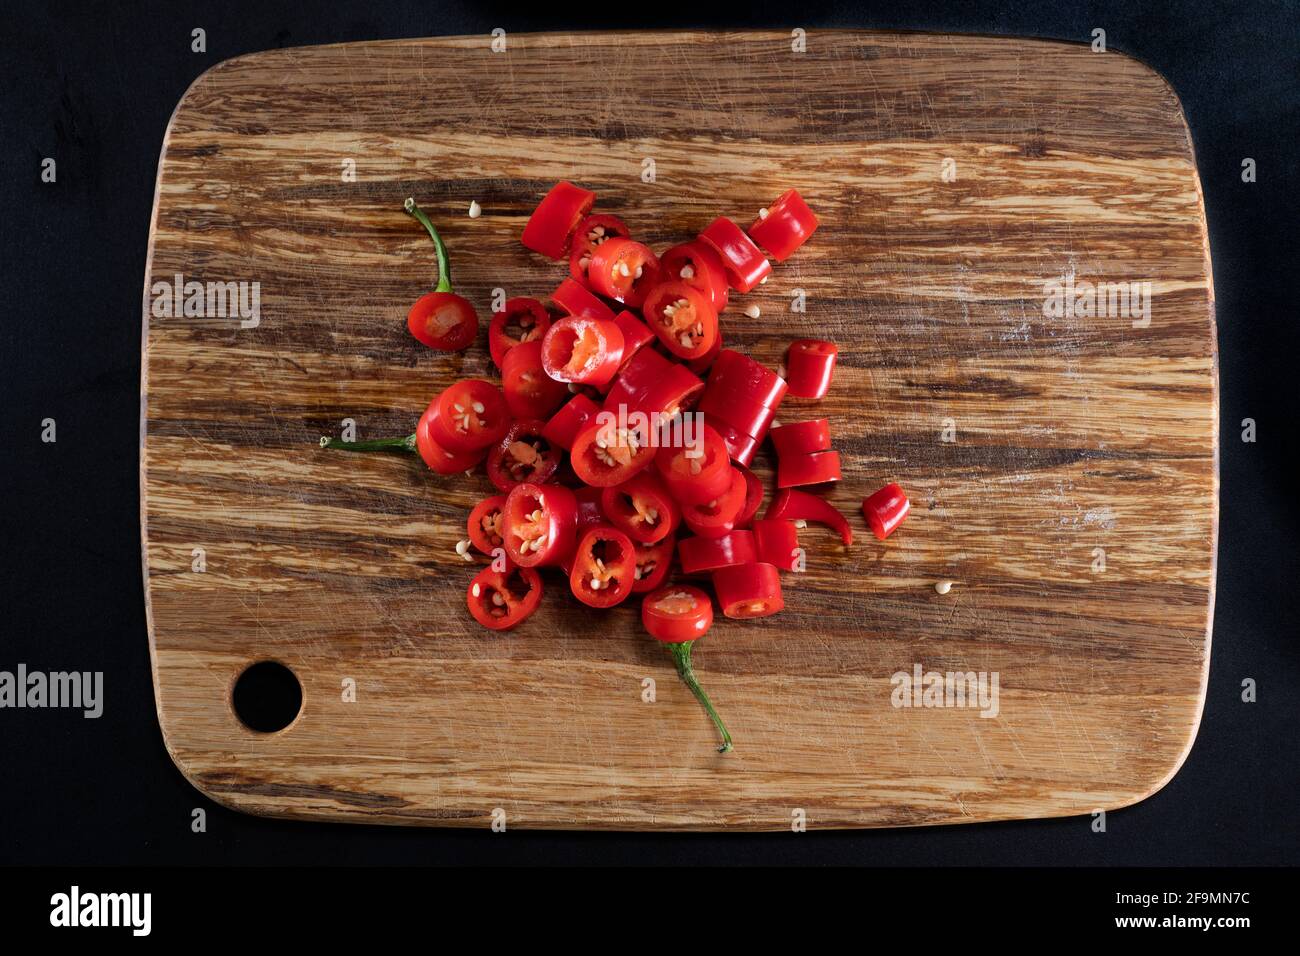 Cayenne, long red chili peppers on cutting board Stock Photo